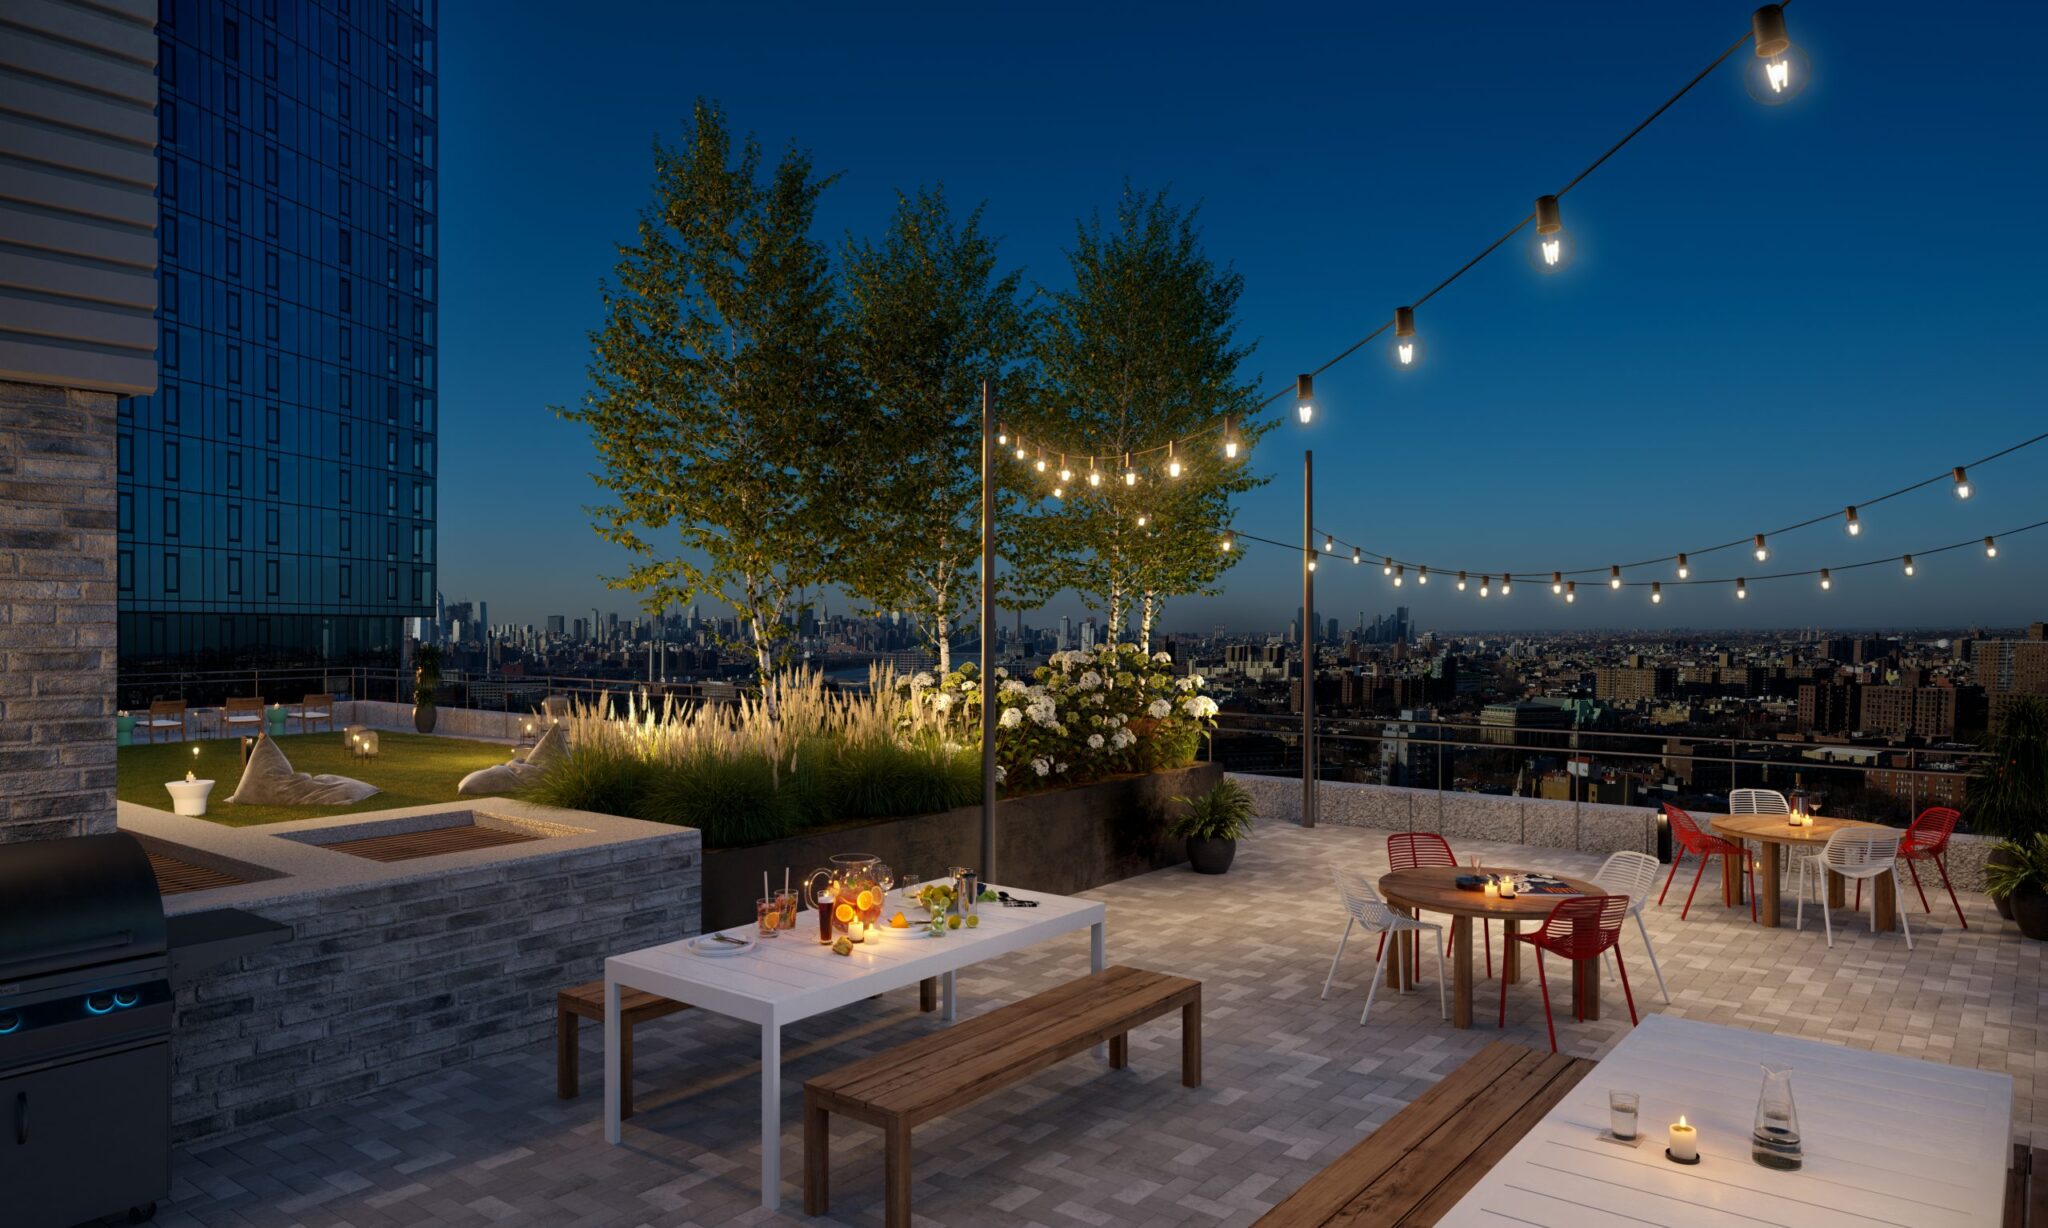 Expansive views from the Plank Road rooftop dining and grilling area with landscaping